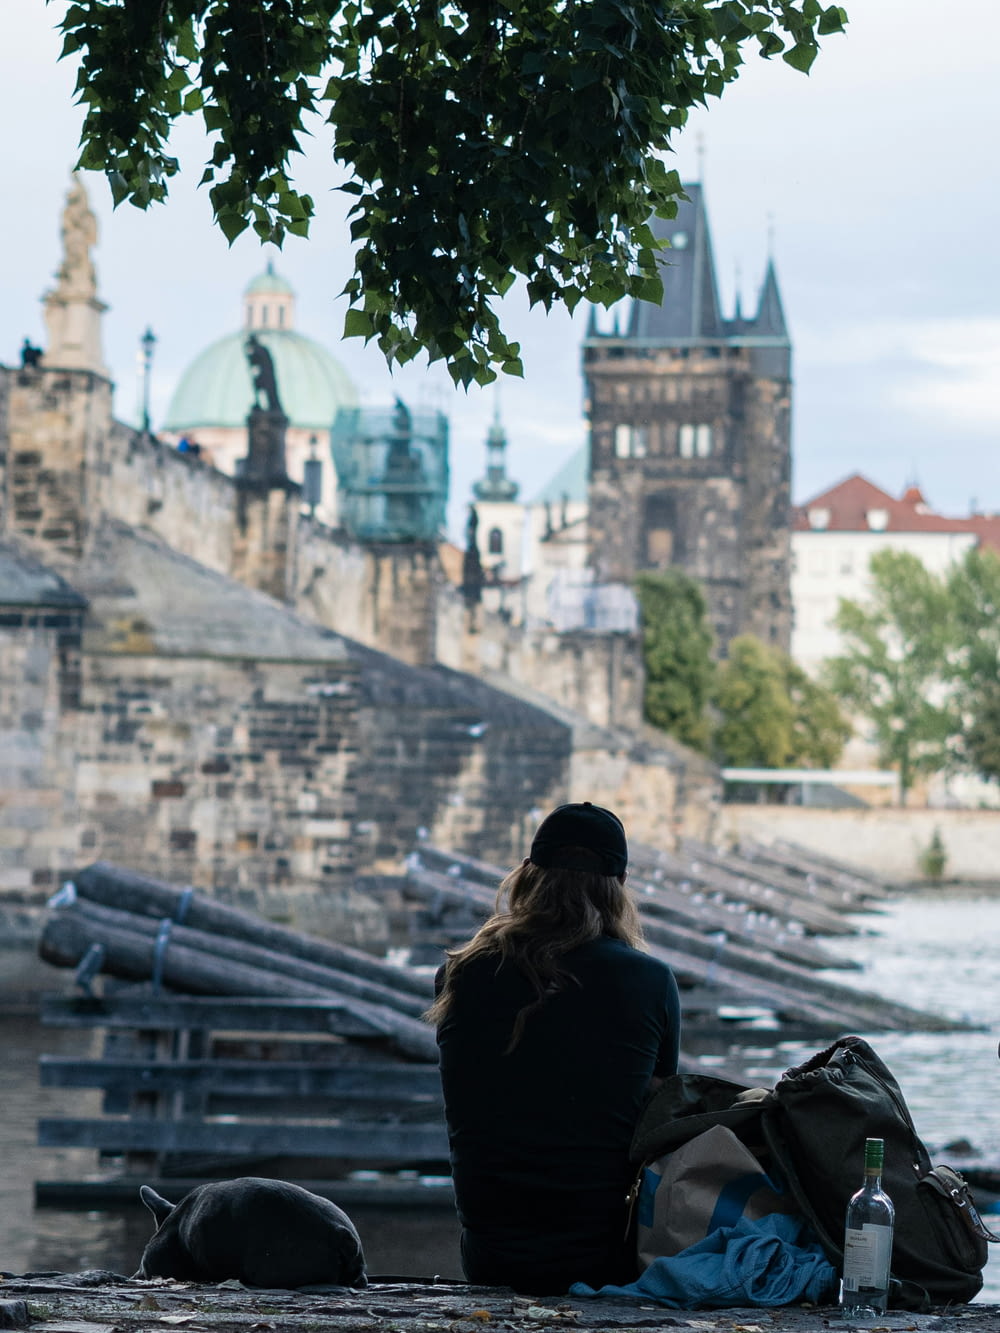 a person sitting on a bench looking at a castle